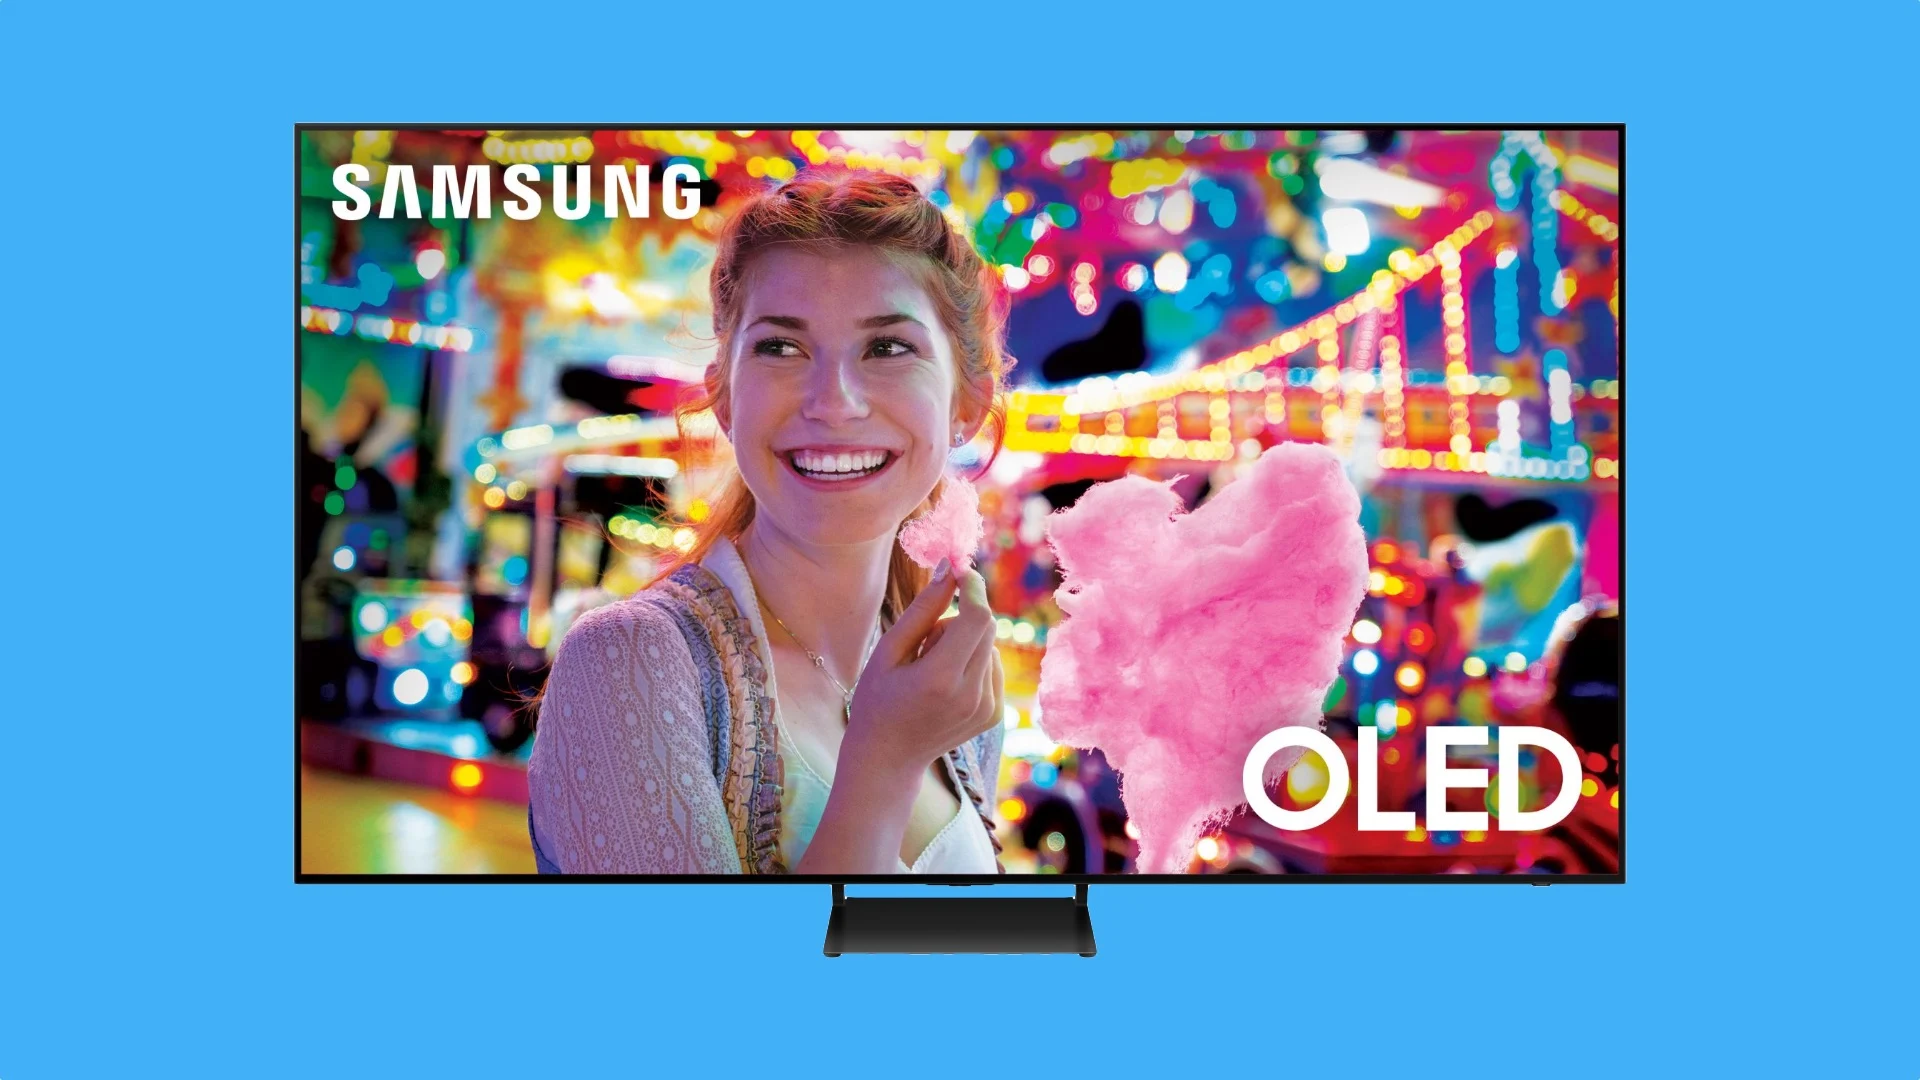 Samsung has announced its largest OLED TV - the QN83S90C model with a LG panel is presented for $5400